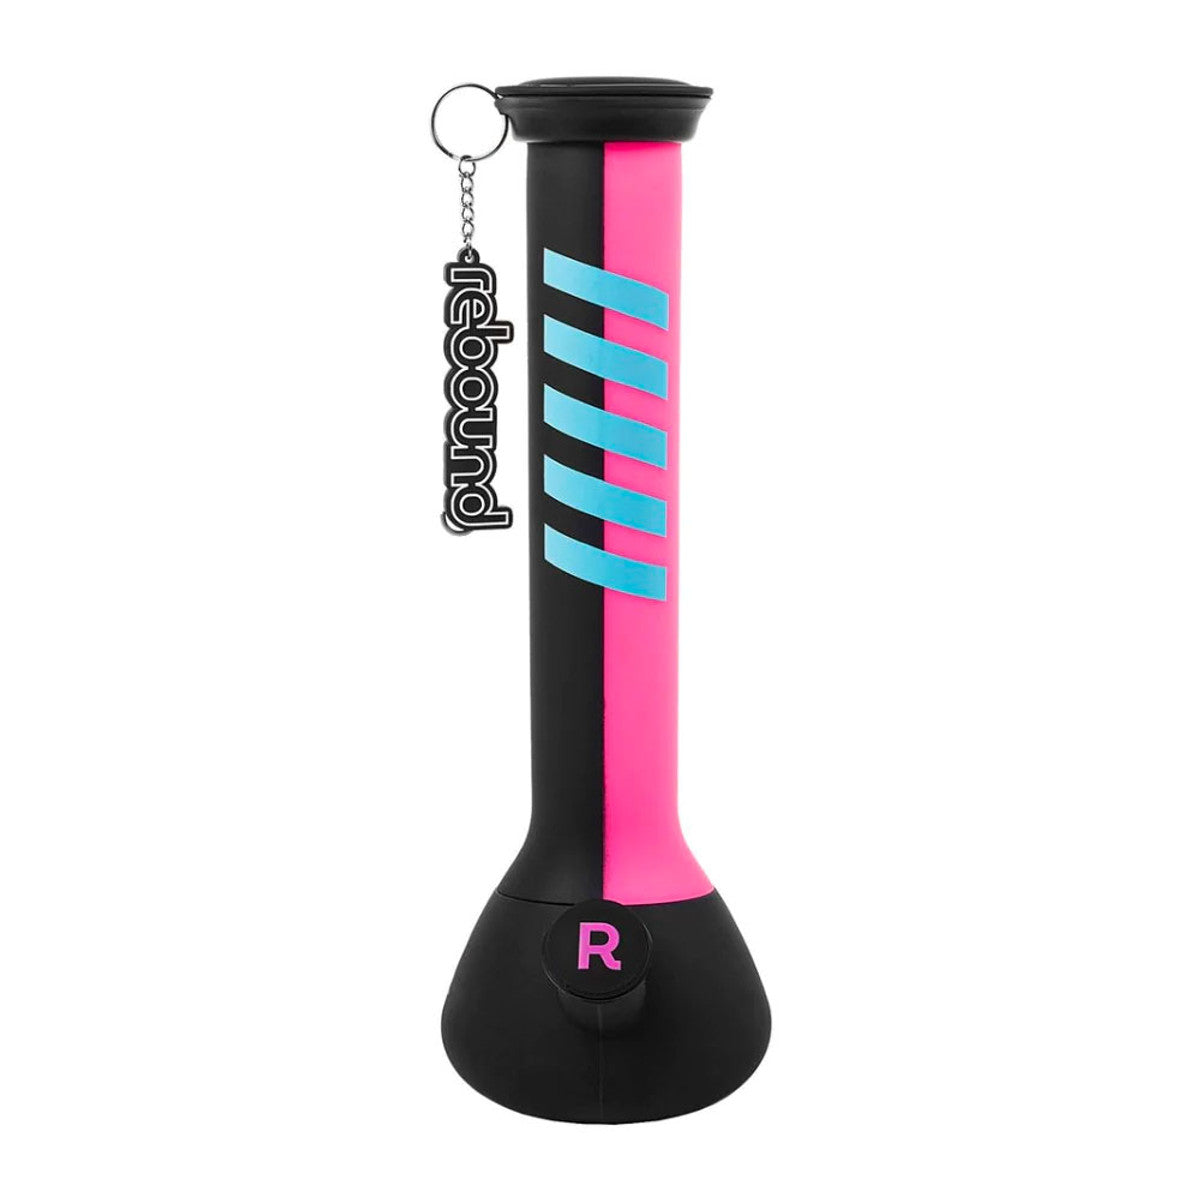 Rebound line up of silicone bongs and pipes are the shatterproof alternative to traditional glass. Whether its’ at home or on-the-go, Rebound’s unbreakable and eye catching designs will ensure your seshes are enjoyed to the fullest. Meet Rebound Edition 1 Waterpipes. Measuring 14" tall, Rebound water pipes are made from durable silicone making them shatterproof.